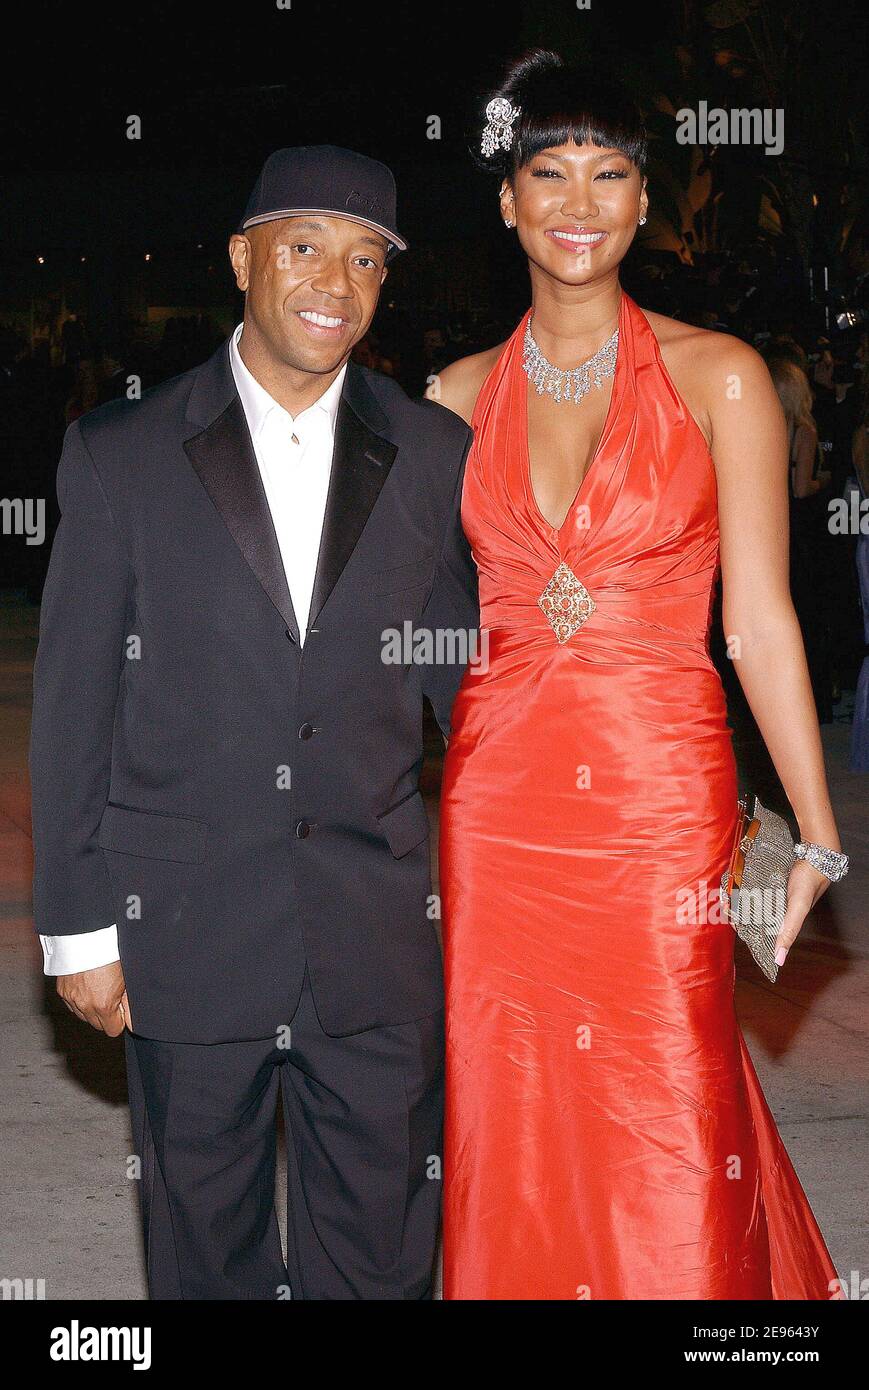 Russell simmons wife